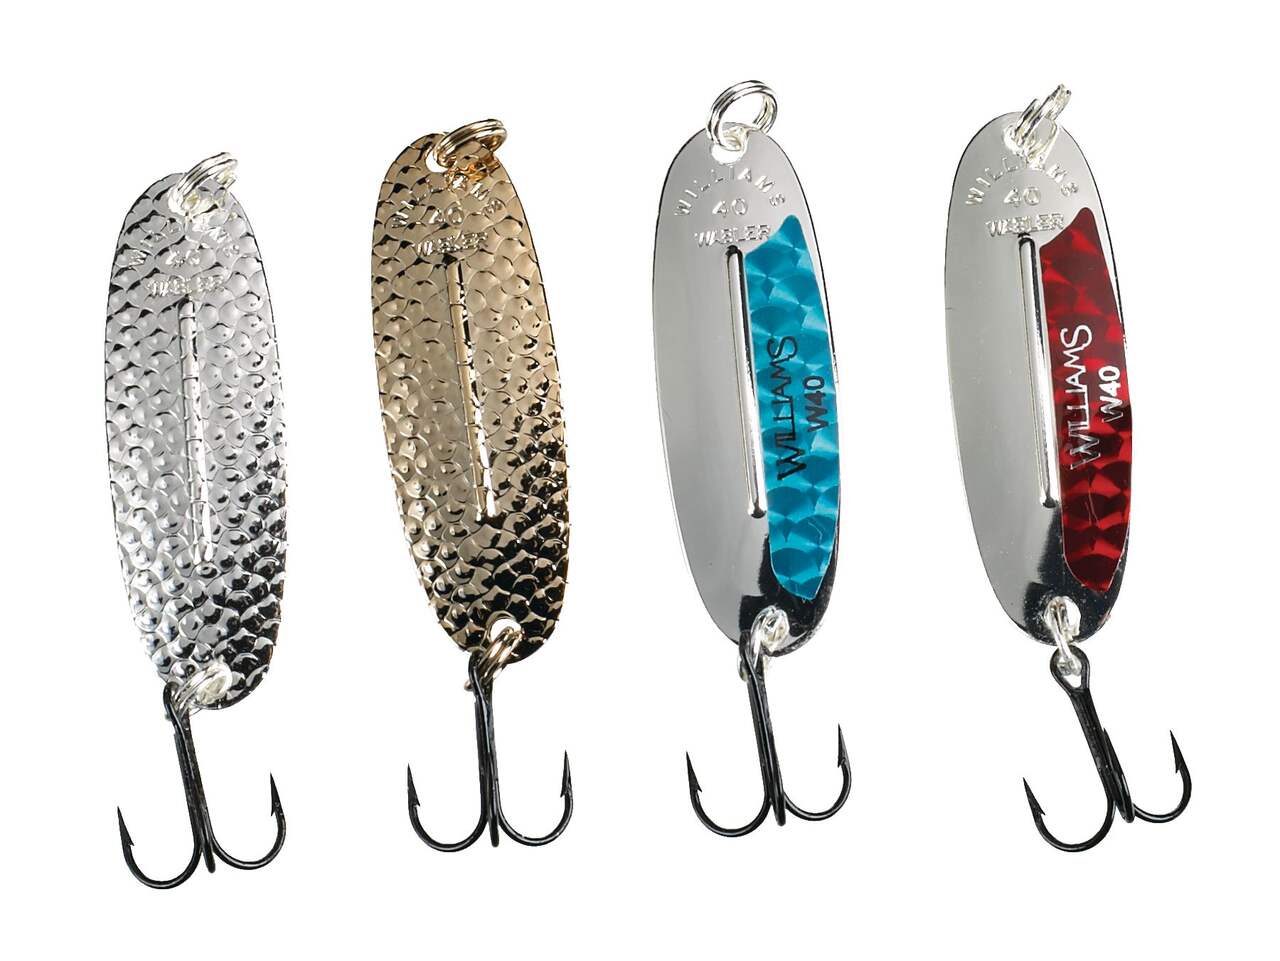 Spinning Tackle for Trout - from Fishing Smarter for Trout